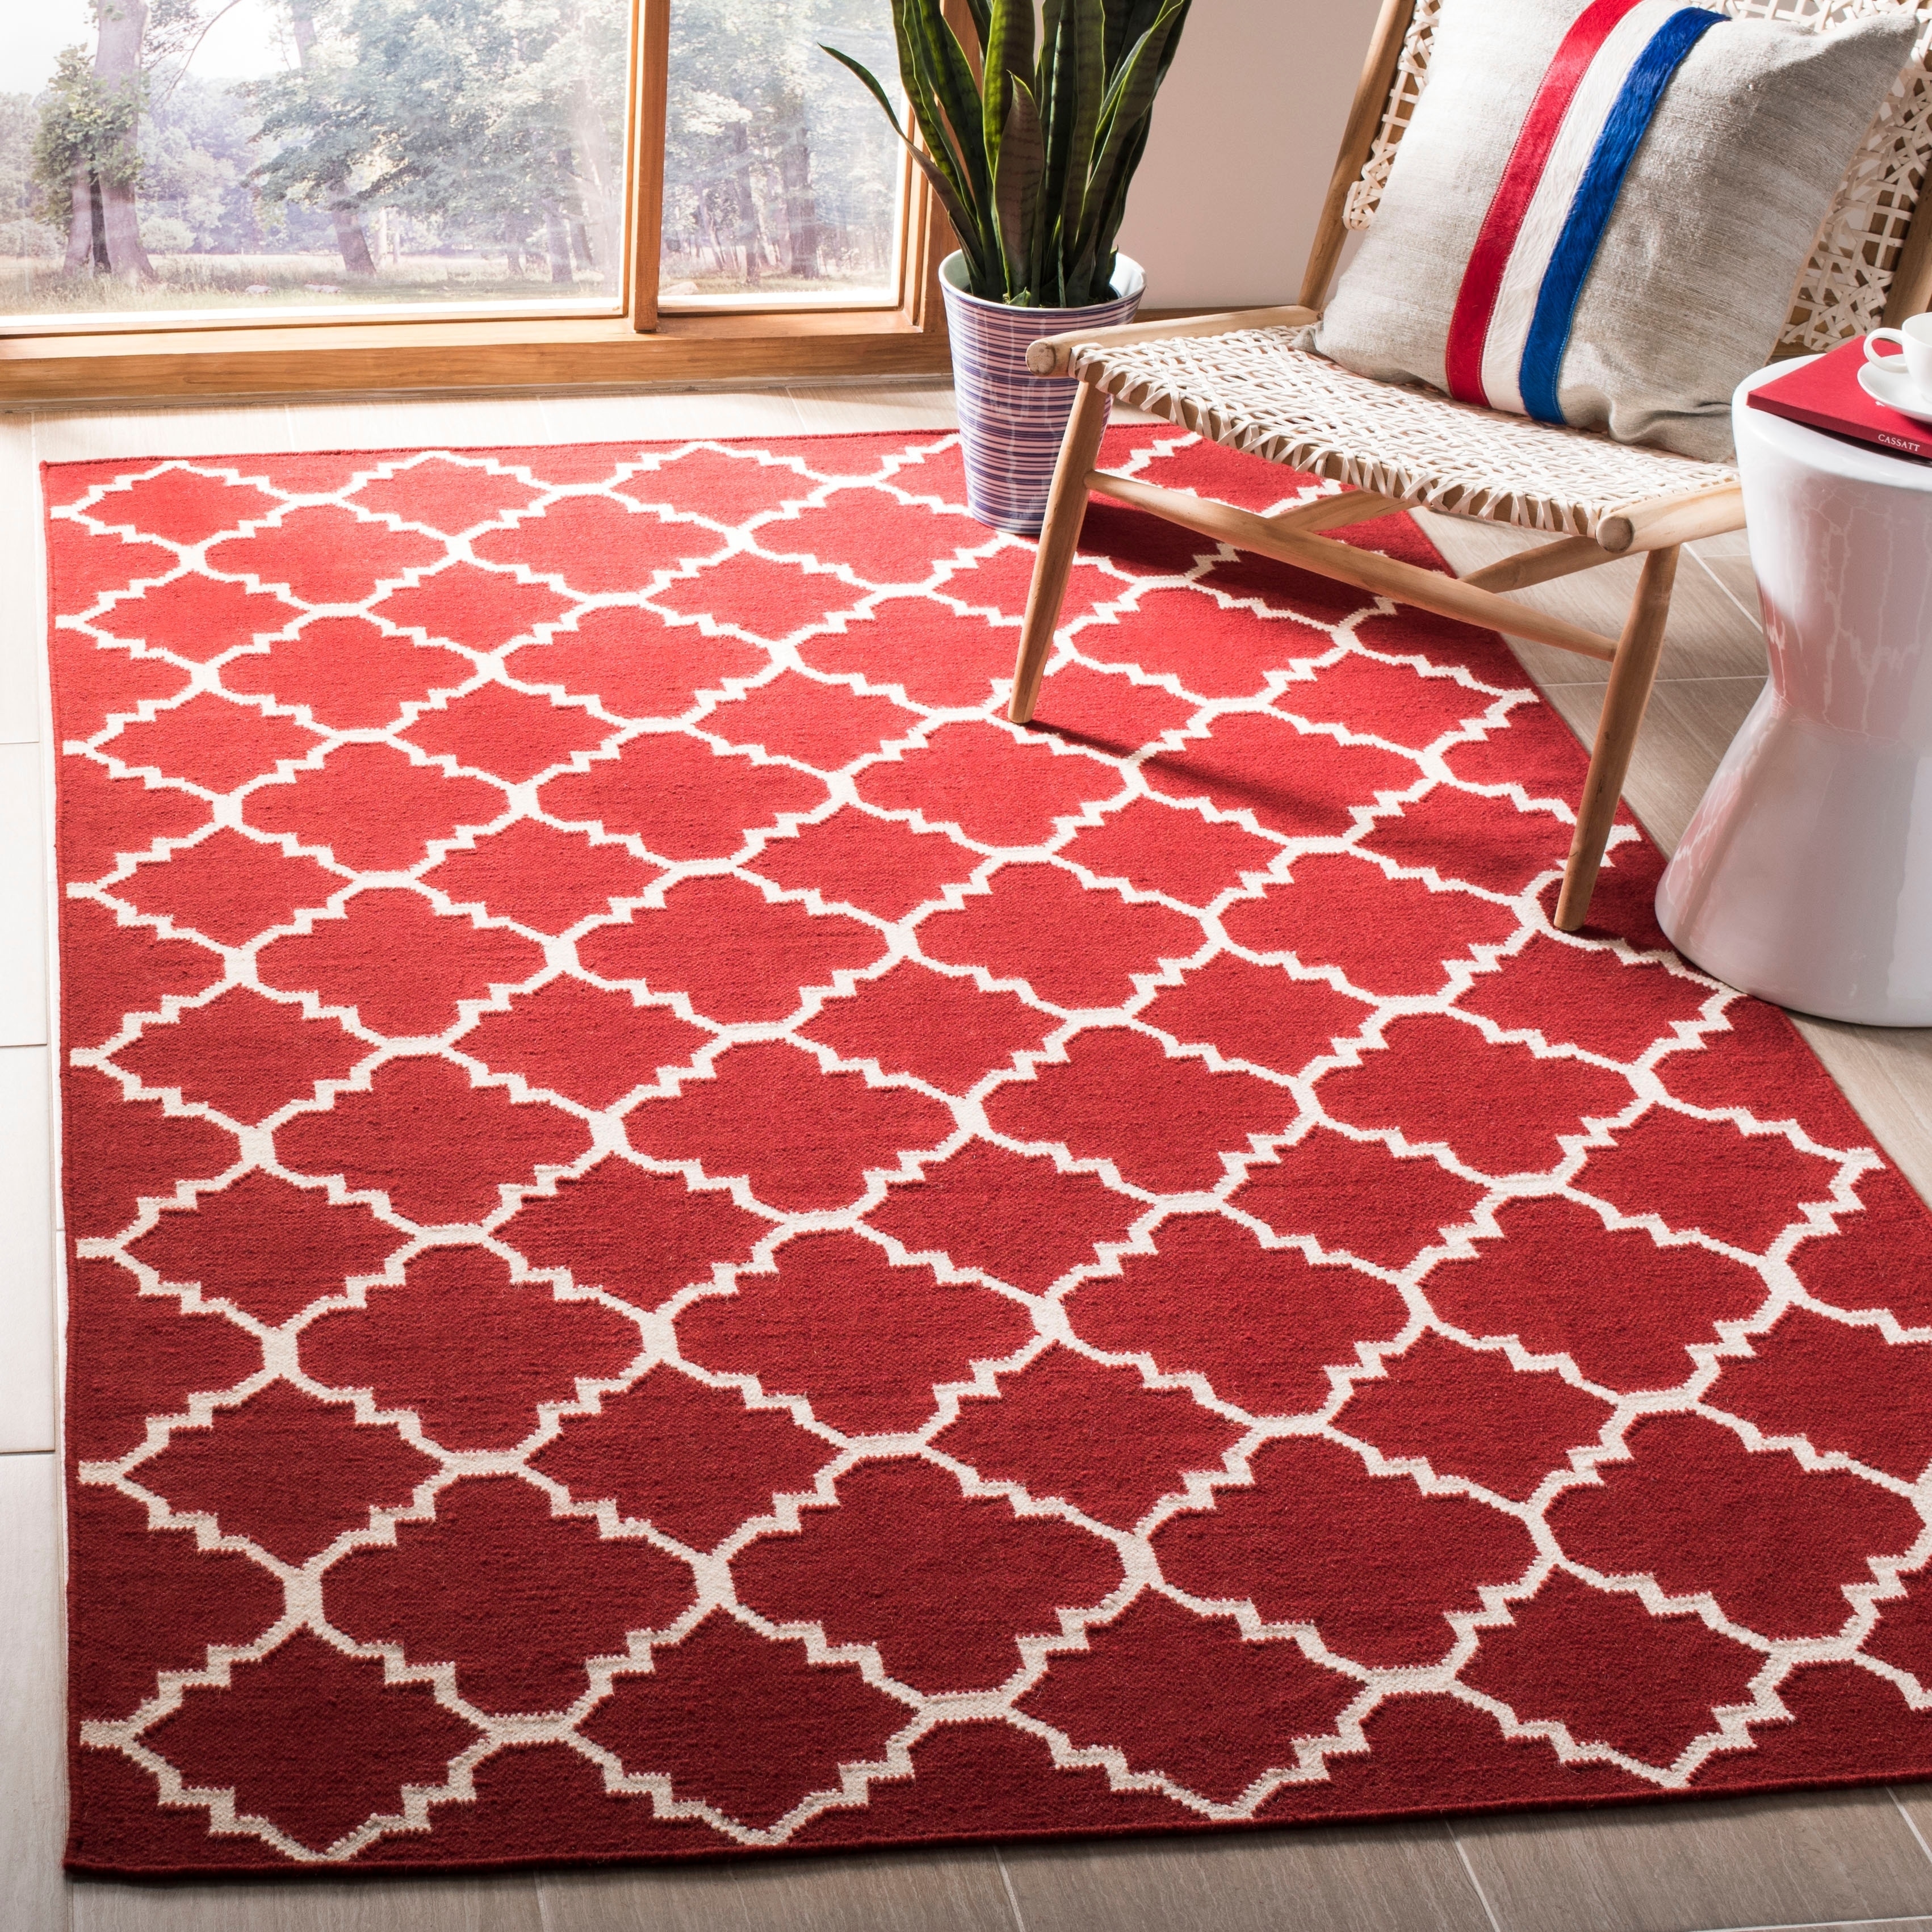 Safavieh Hand woven Moroccan Dhurrie Red/ Ivory Wool Rug (8 Square)